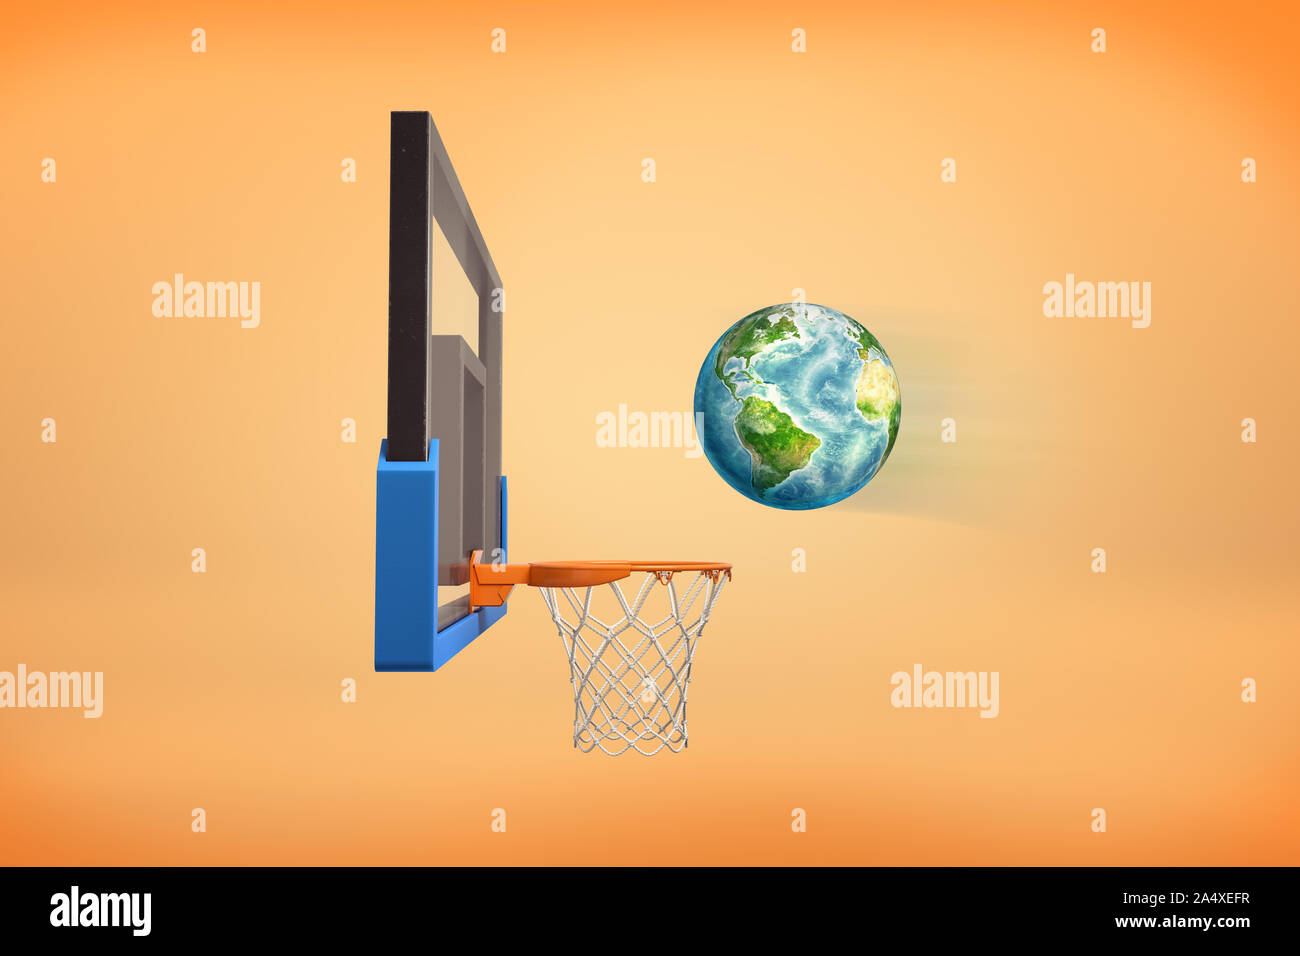 3d rendering of realistic ball looking like an Earth globe flies ready to fall inside a basketball hoop. Stock Photo